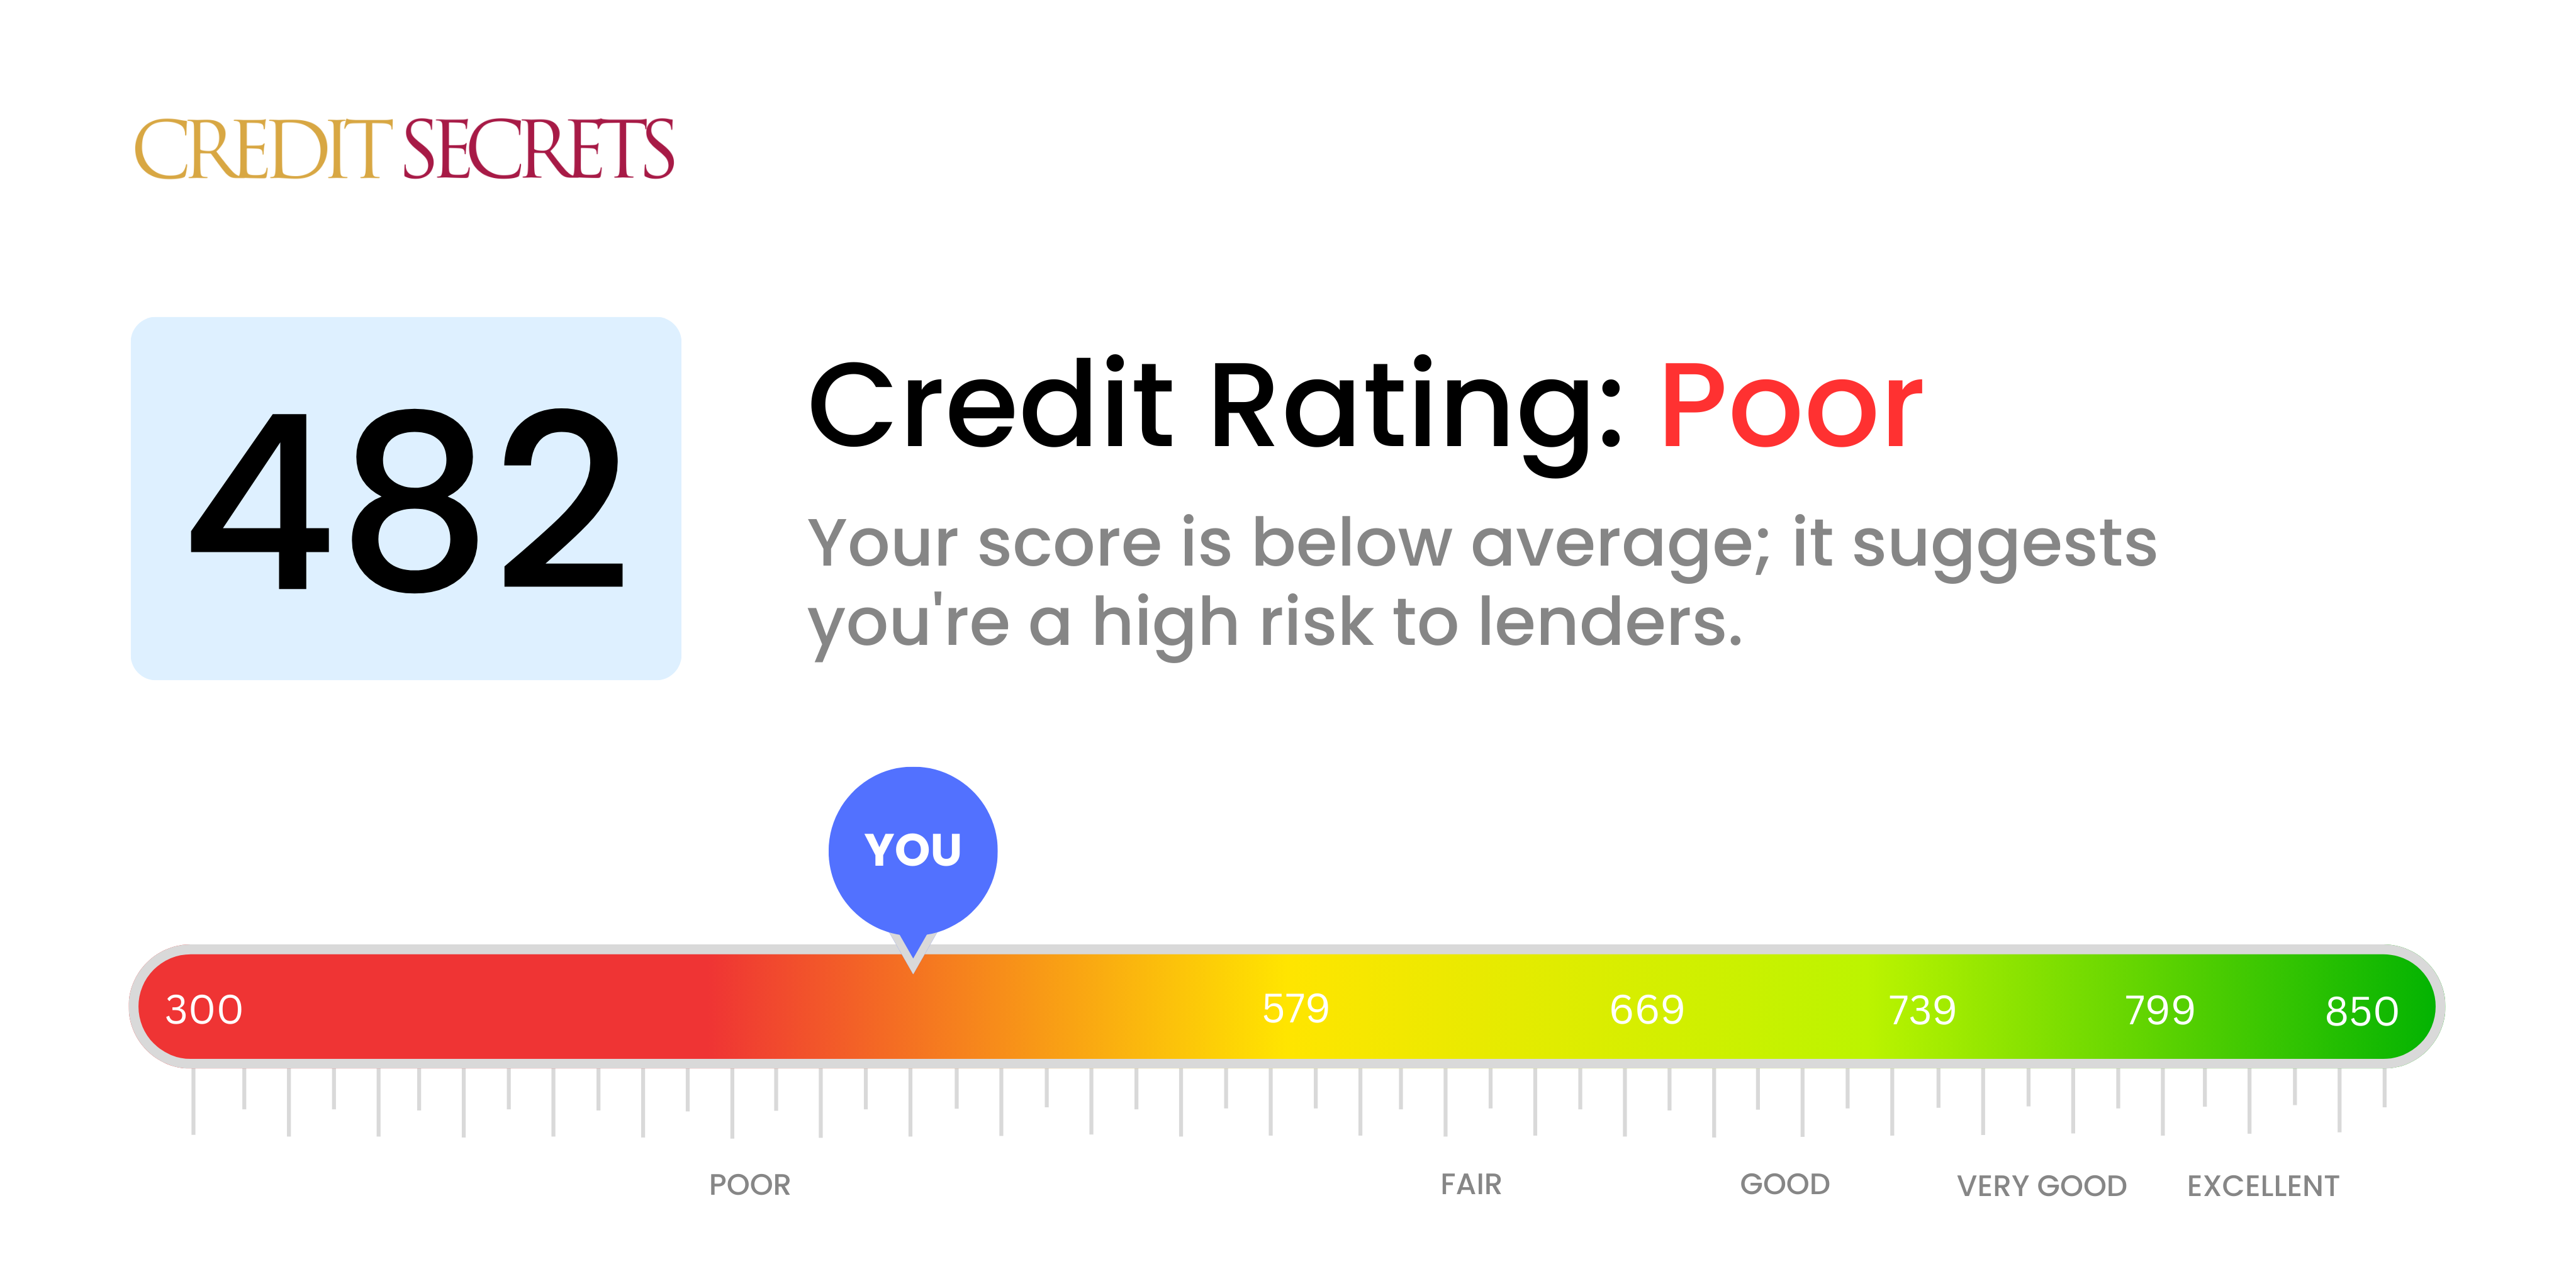 Is 482 a good credit score?